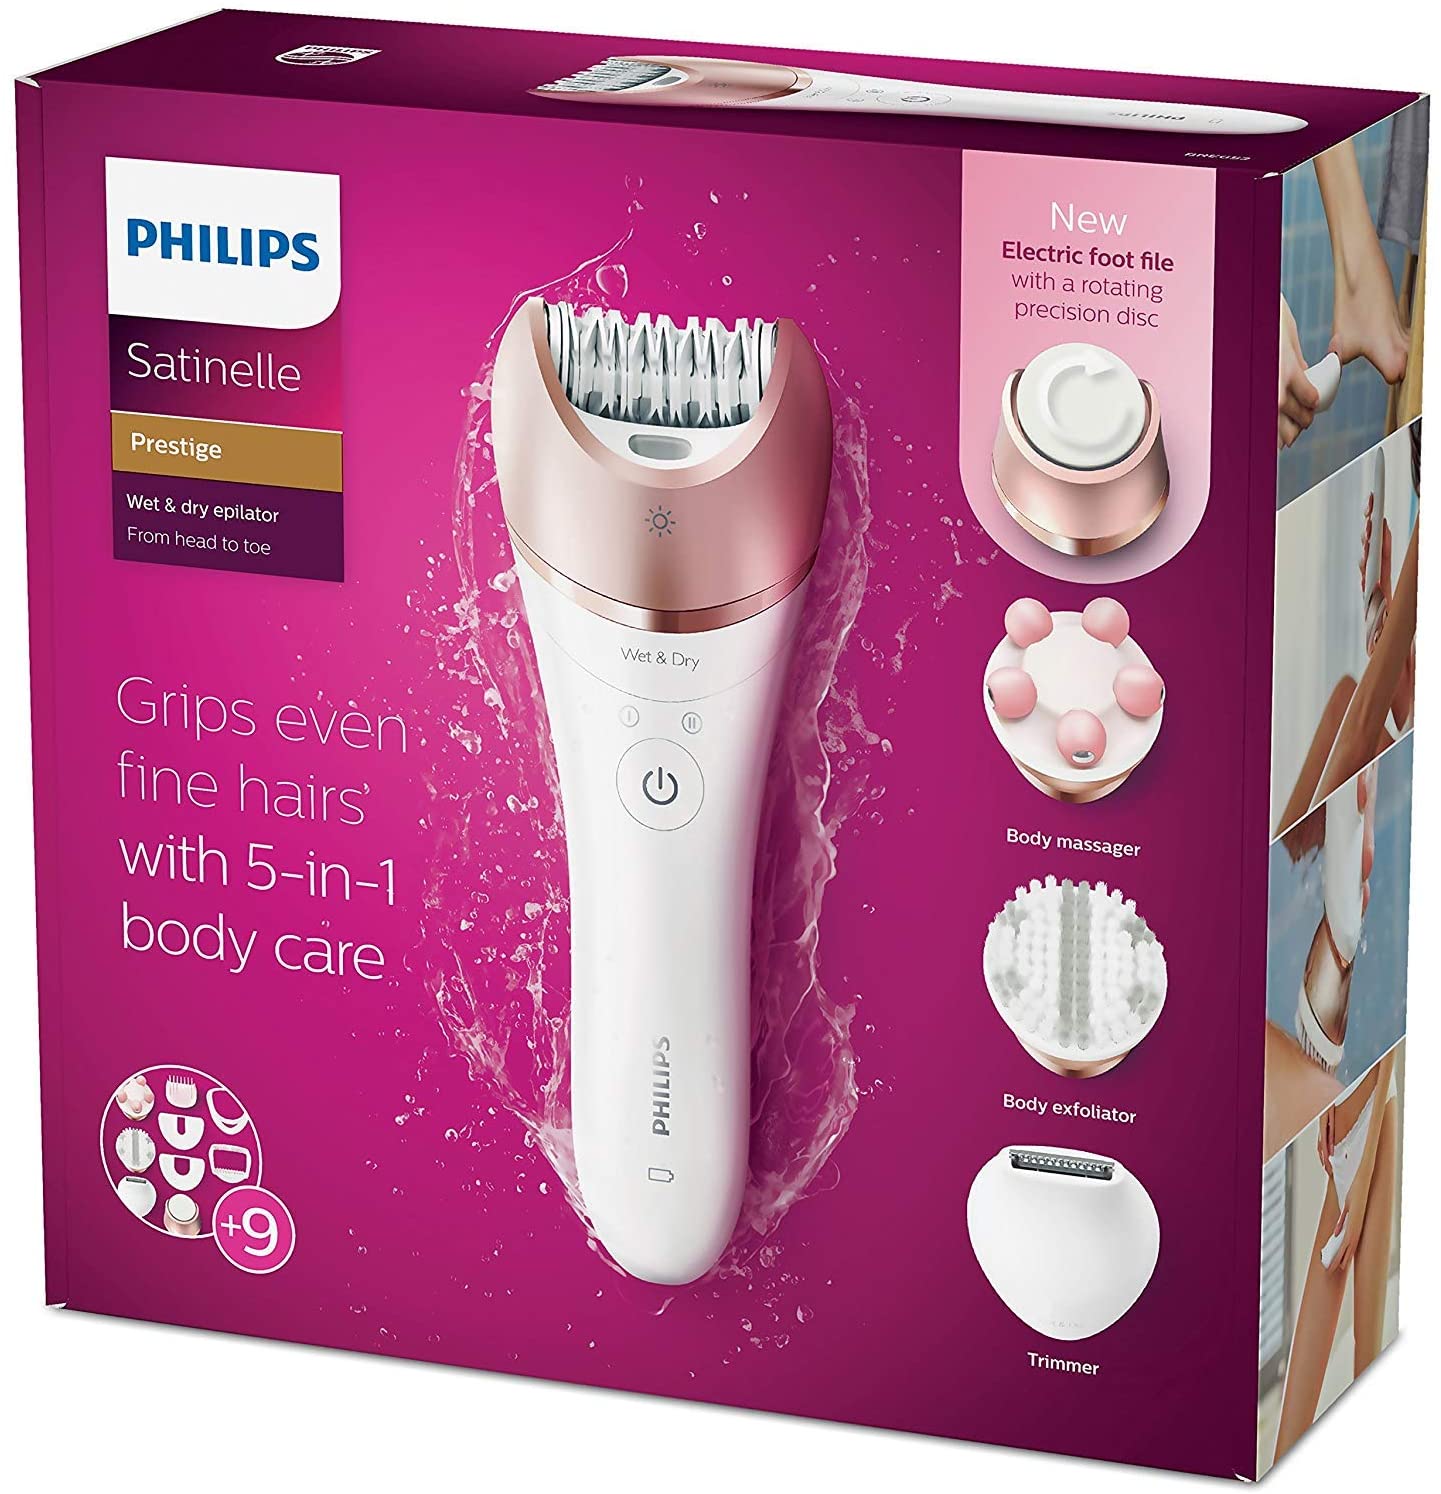 15 Best Facial Hair Removal Products For Women – Top Picks Of 2023